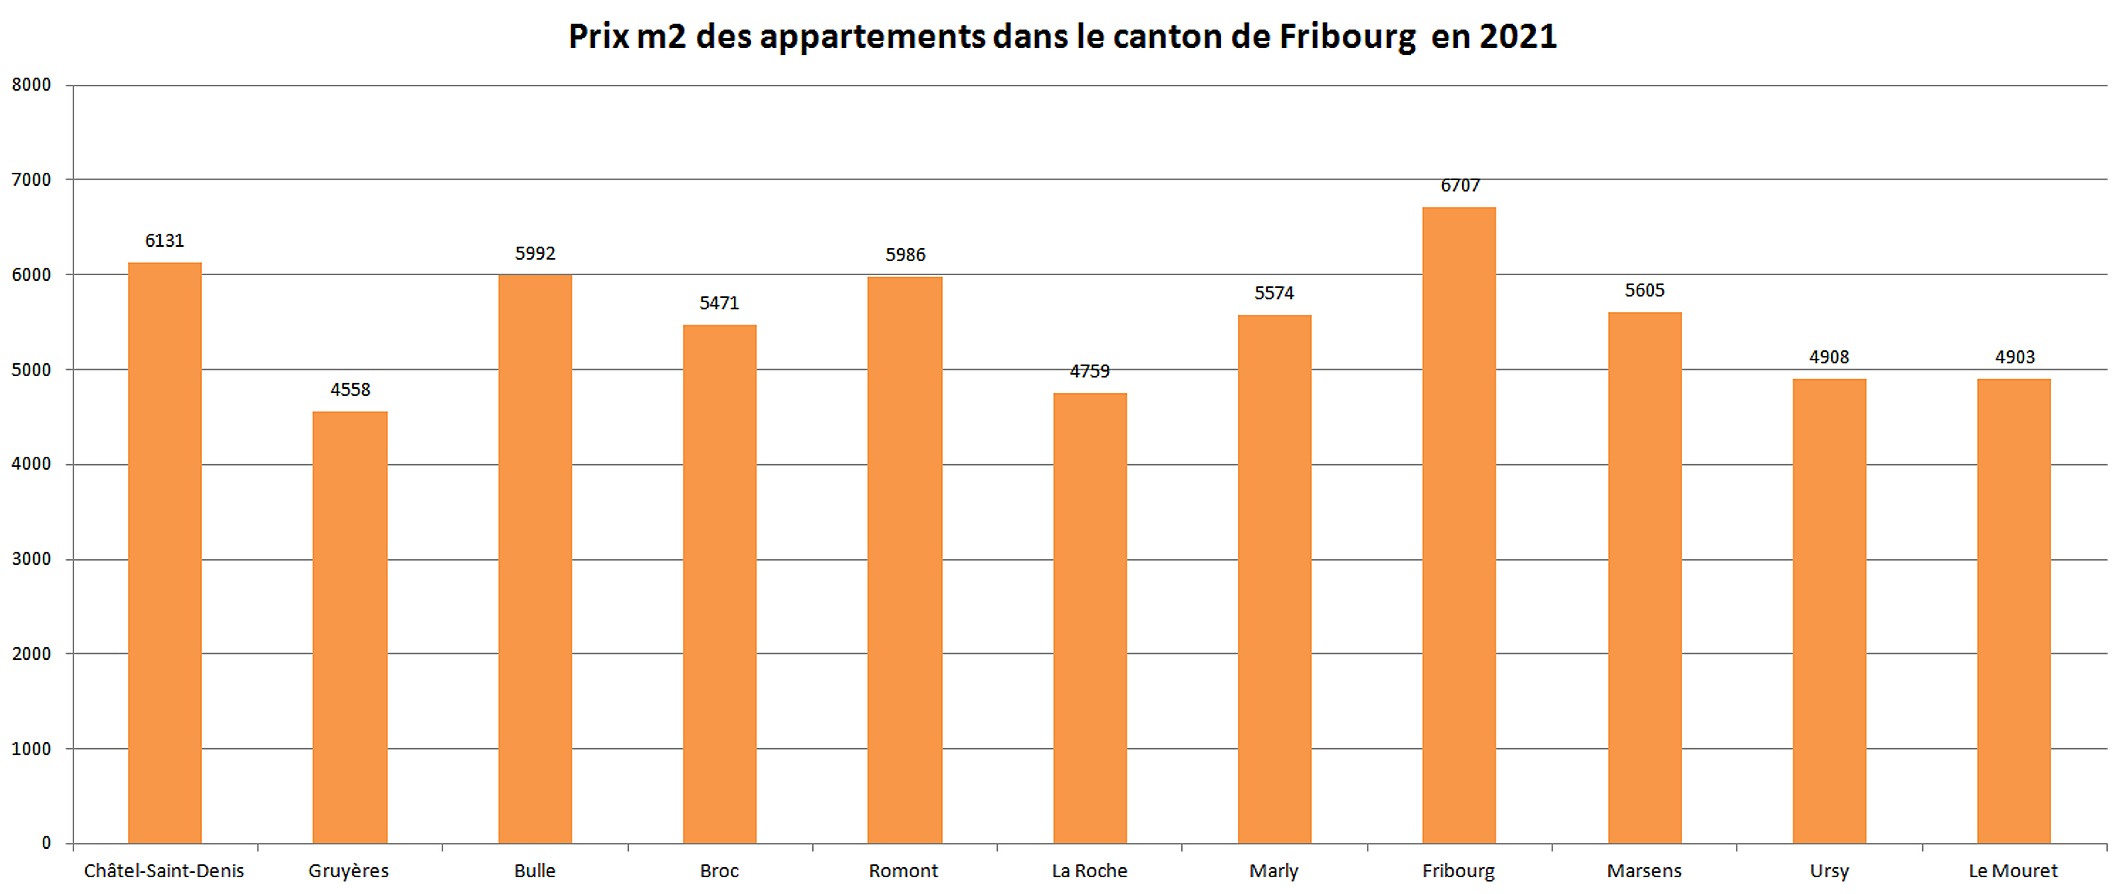 prix m2 immobilier appartement fribourg 2021